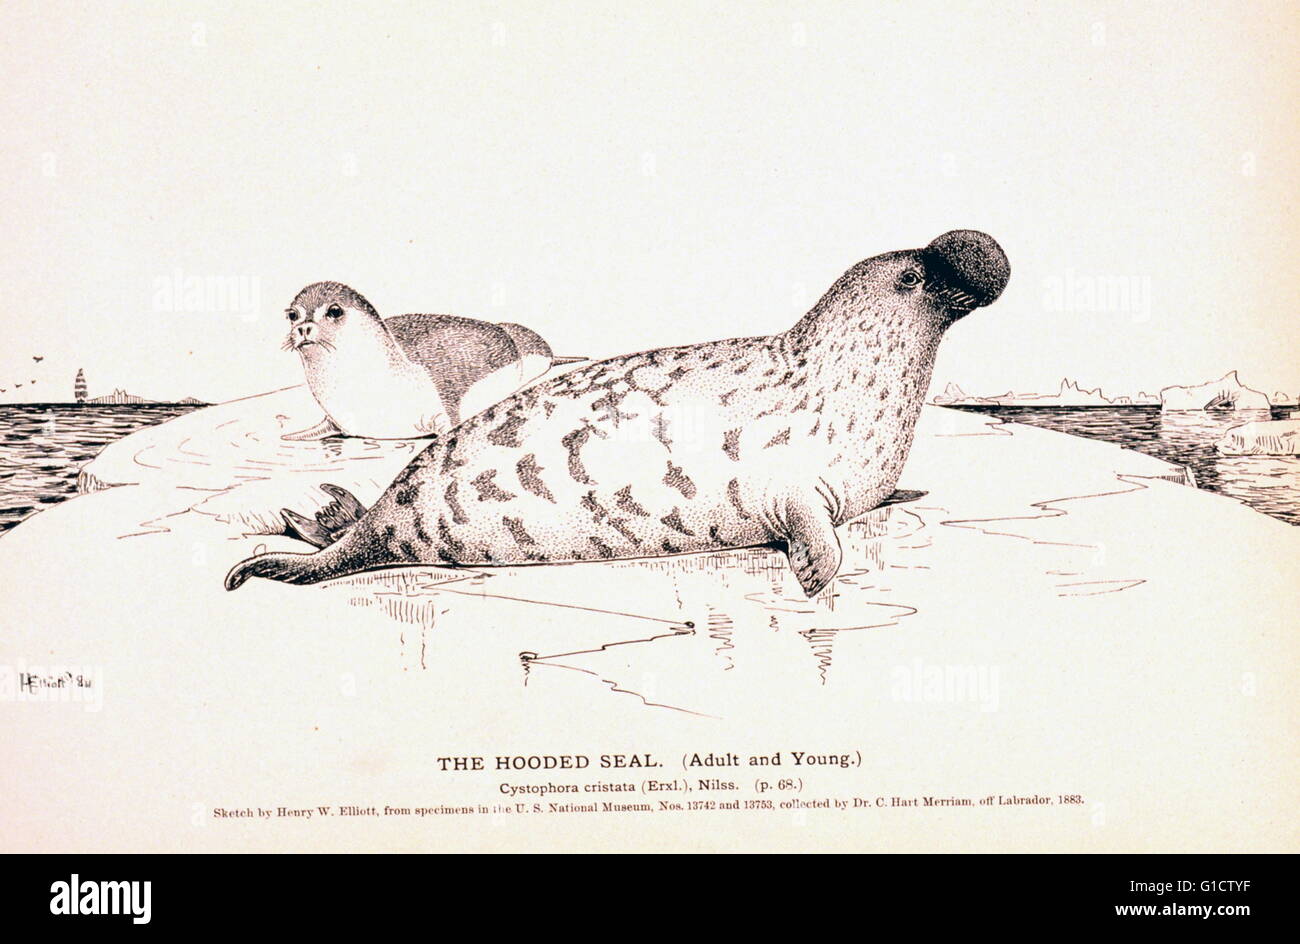 The Hooded Seal. (Adult and young.) Cystophora cristata 1890. The hooded seal (Cystophora cristata) is a large phocid found only in the central and western North Atlantic; ranging from Svalbard in the east to the Gulf of St. Lawrence in the west Stock Photo